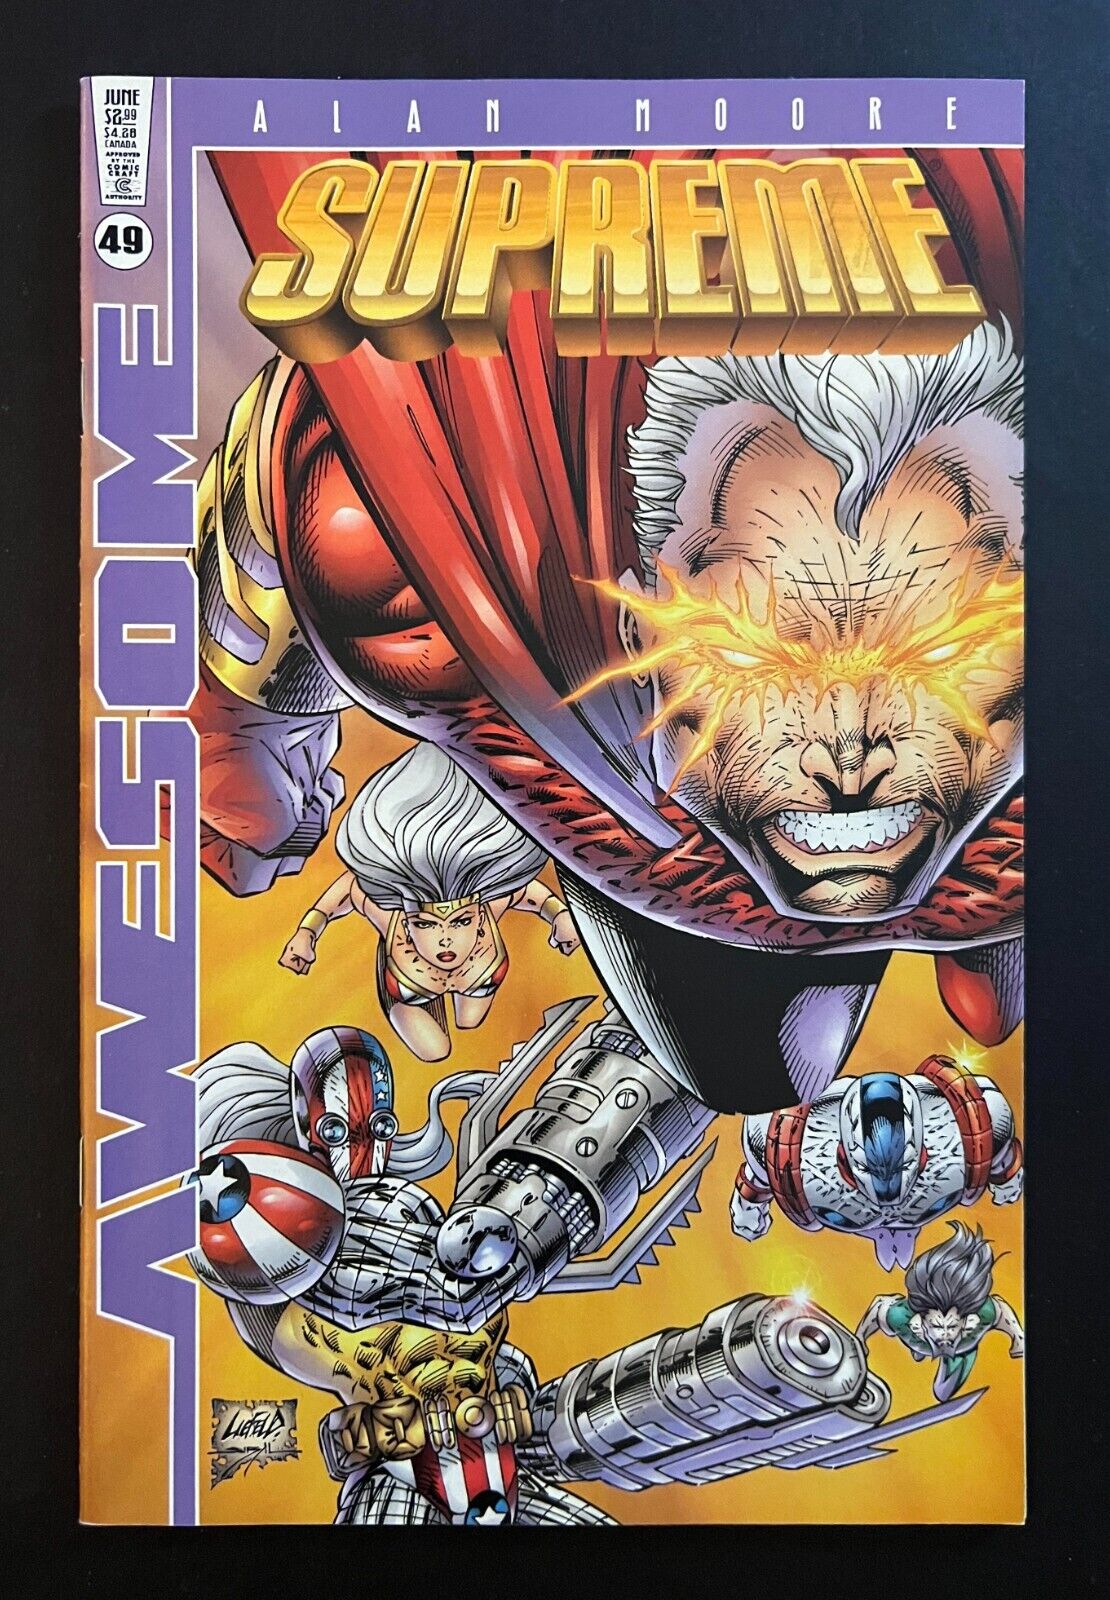 SUPREME #49 Hi-Grade By Alan Moore Rob Liefeld Cover Awesome 1997